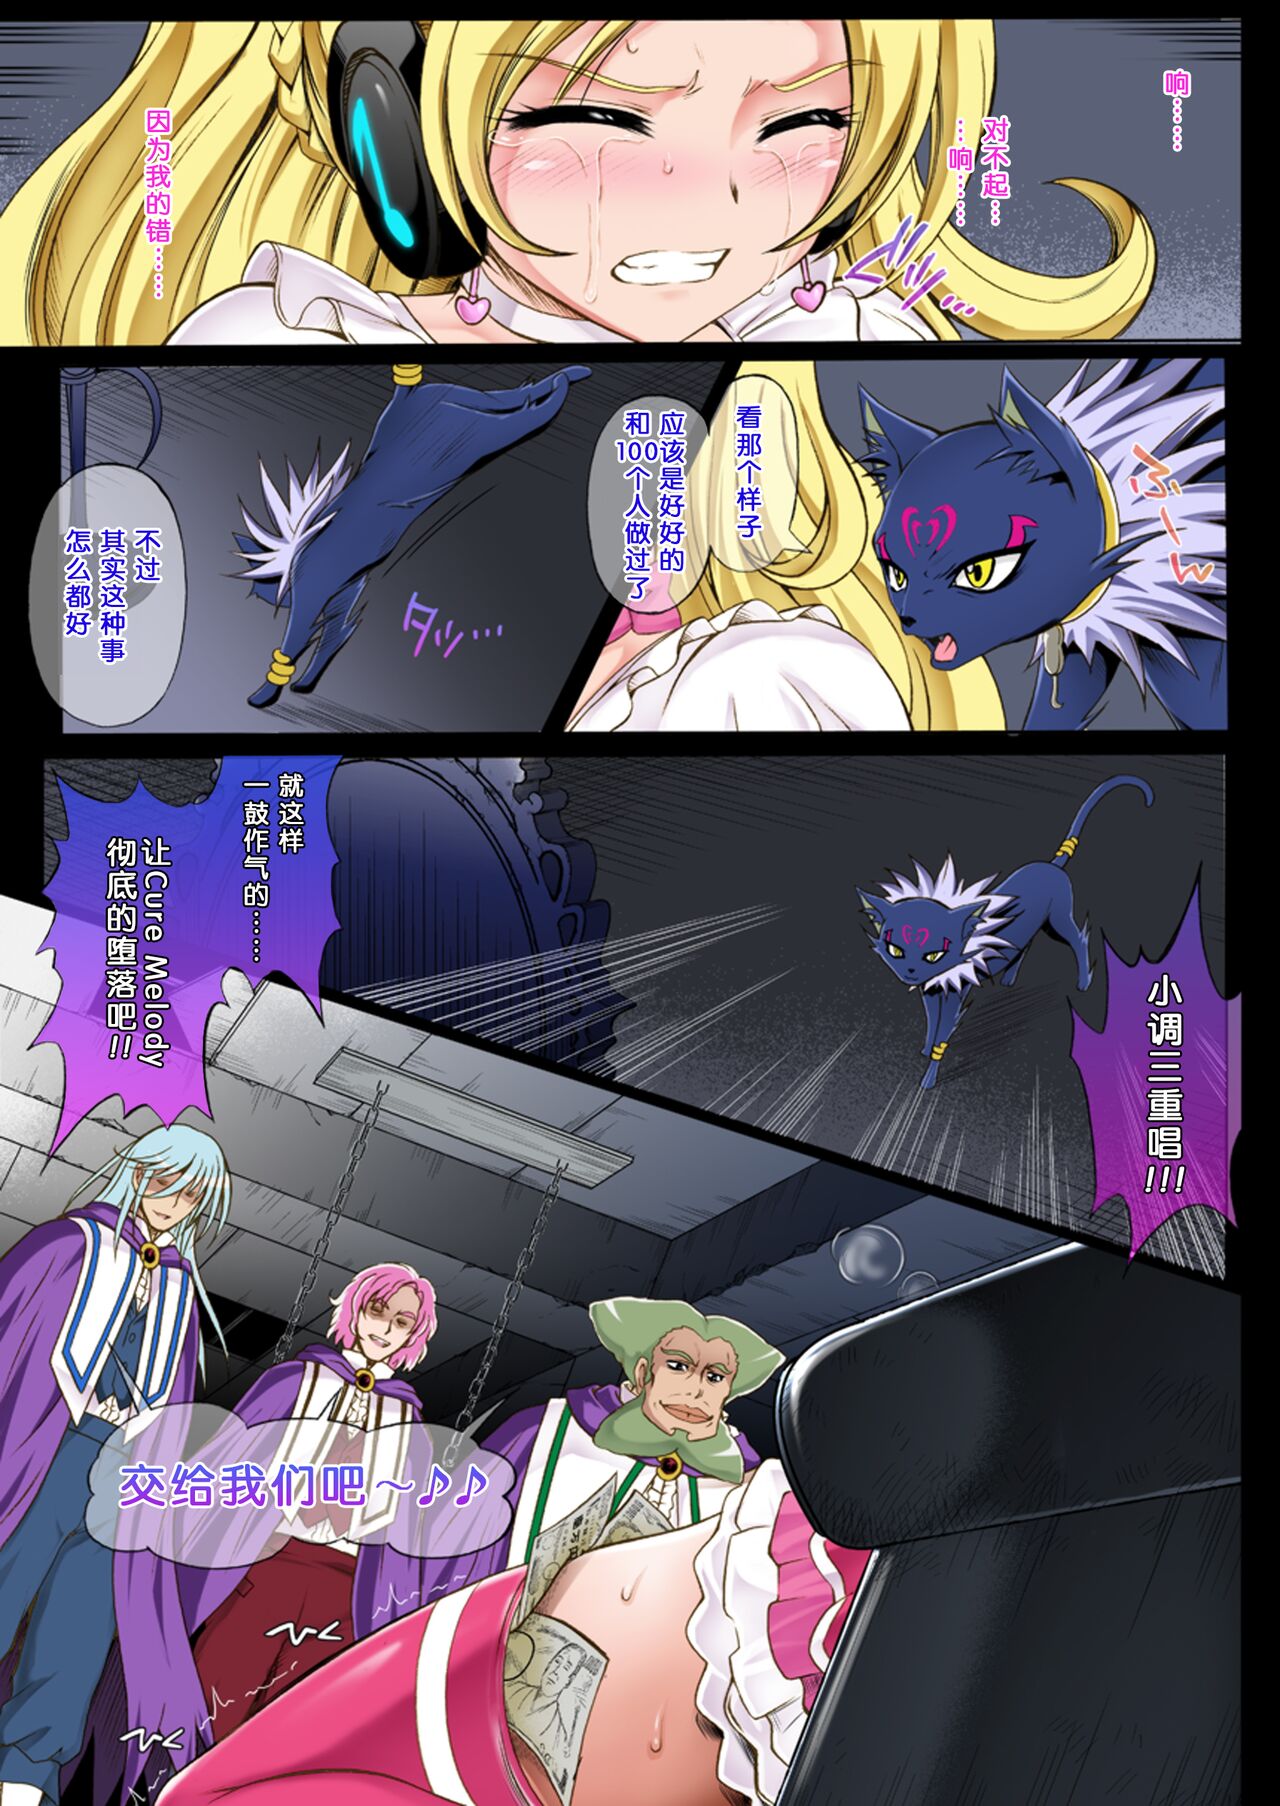 [Cyclone (Izumi, Reizei)] Cyclone no Full Color Pack1 "Sui-Sui" (Suite Precure) [Chinese] [个人重嵌&去条码] [Digital] [サイクロン (和泉、冷泉)] サイクロンのフルカラーパック1「Sui-Sui」 (スイートプリキュア♪) [中国翻訳] [無修正] [DL版]